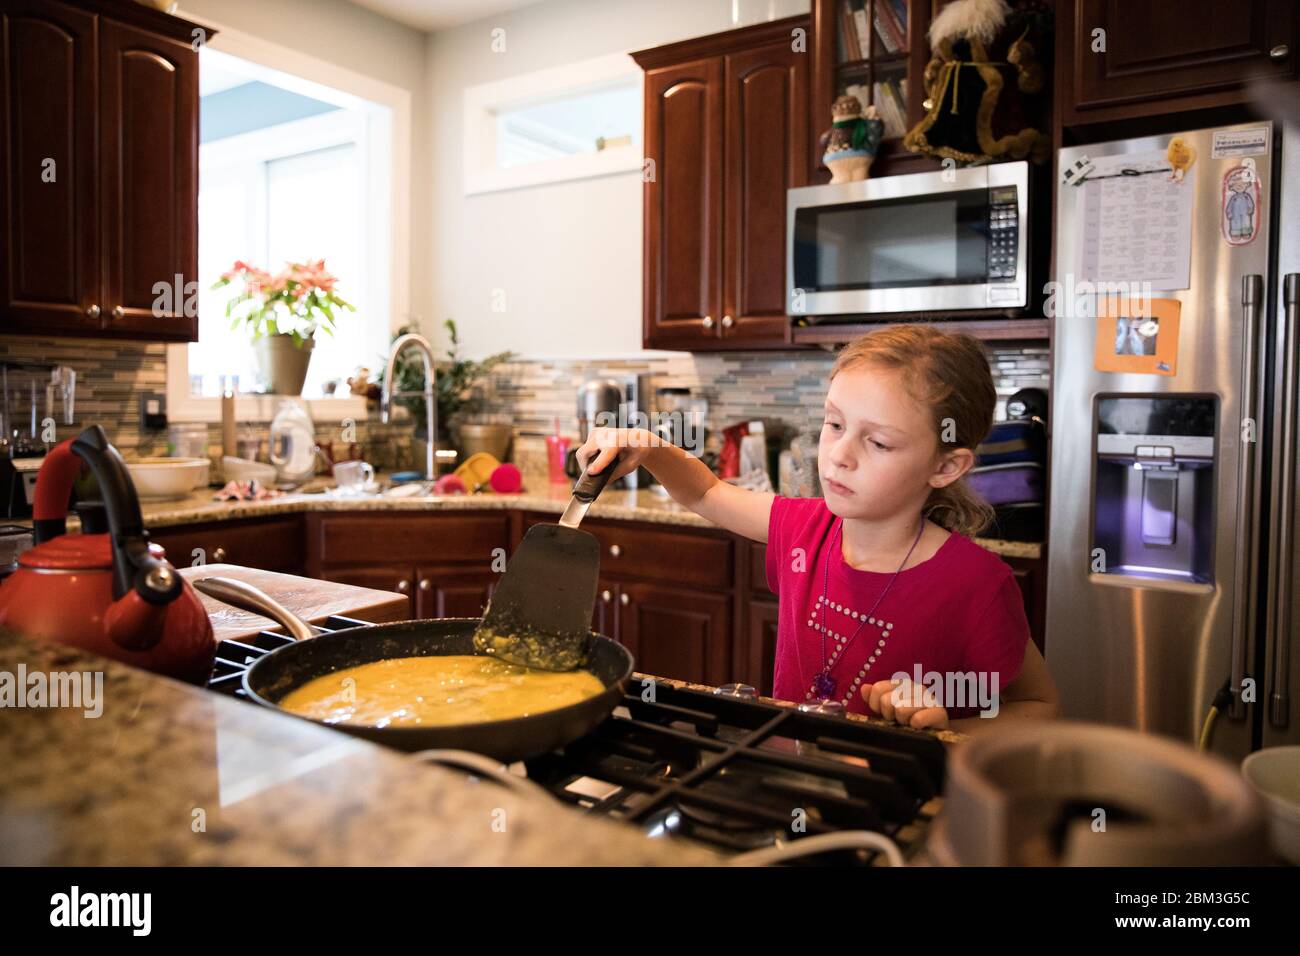 Candid Image of Unsmiling Young Girl Cooking Eggs In Messy Kitchen Stock Photo